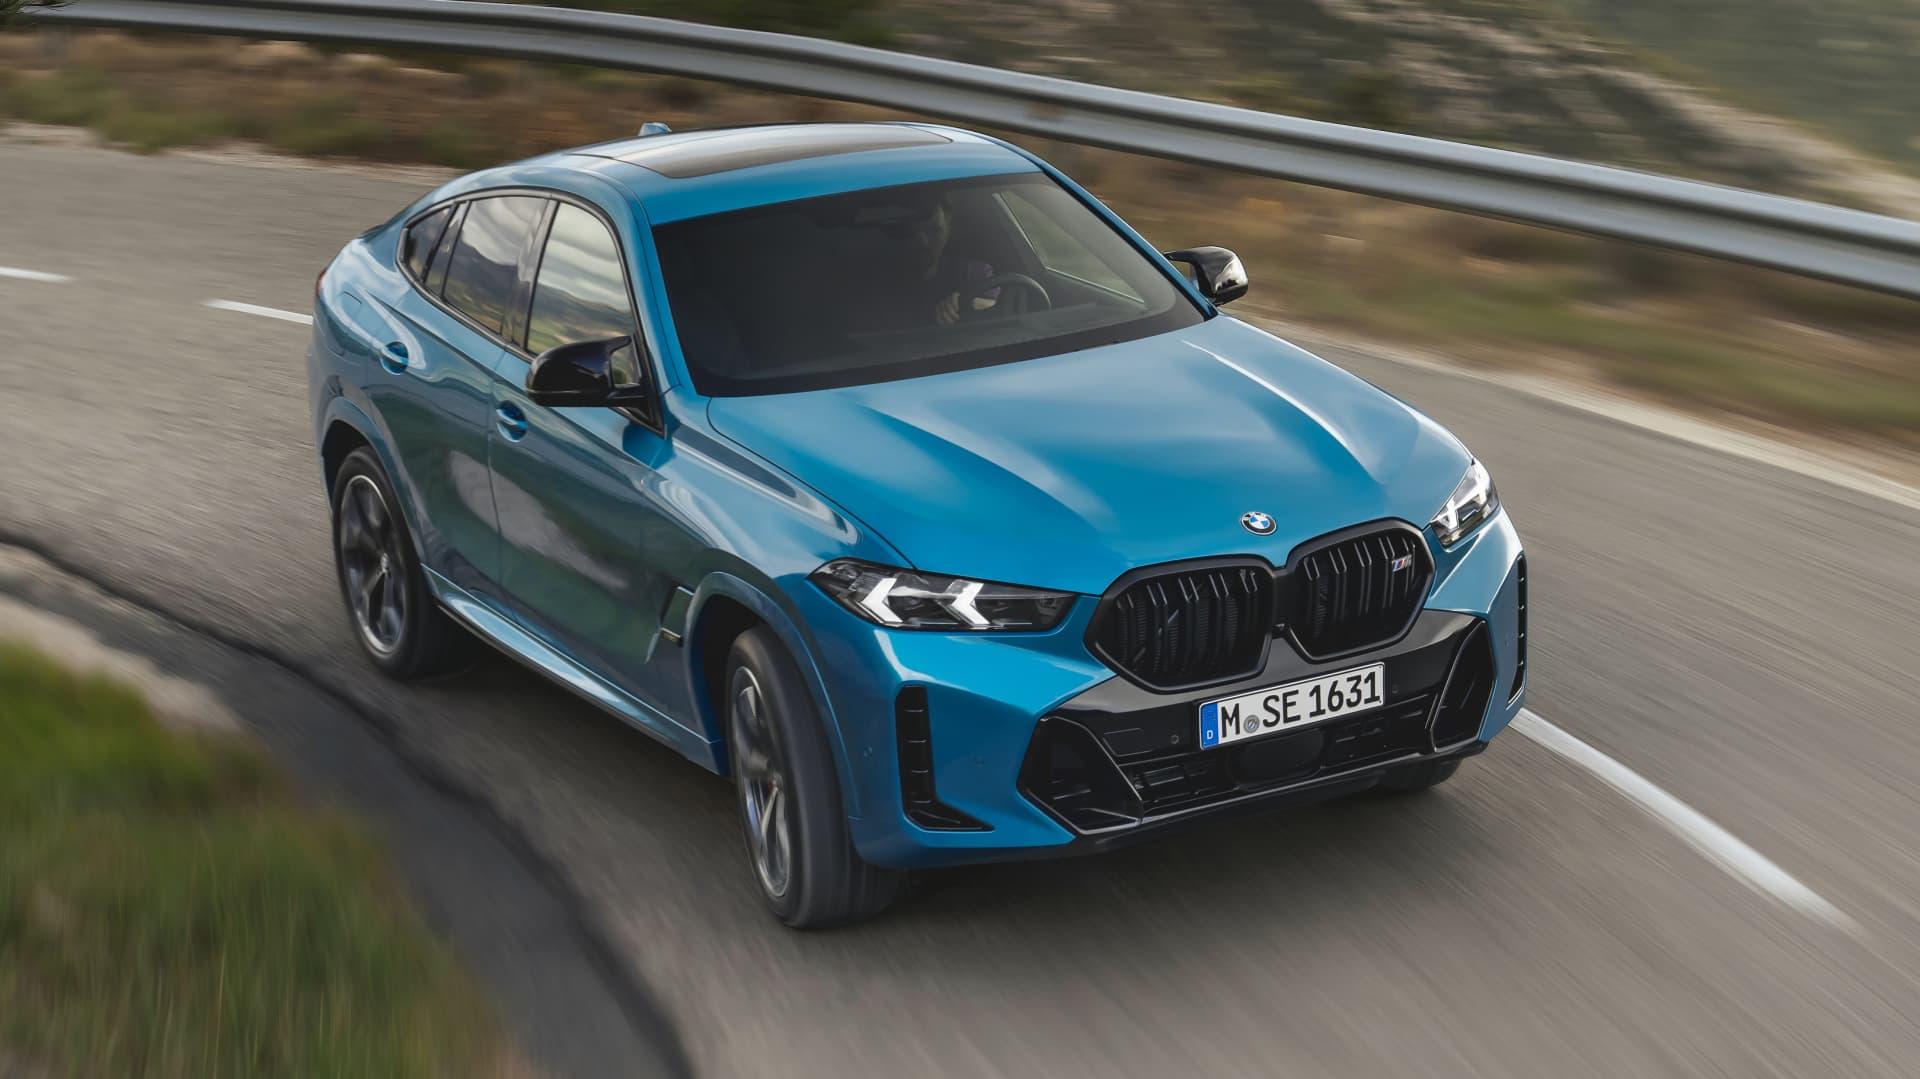  BMW X6 price and specs Facelifted SUV prices up Drive